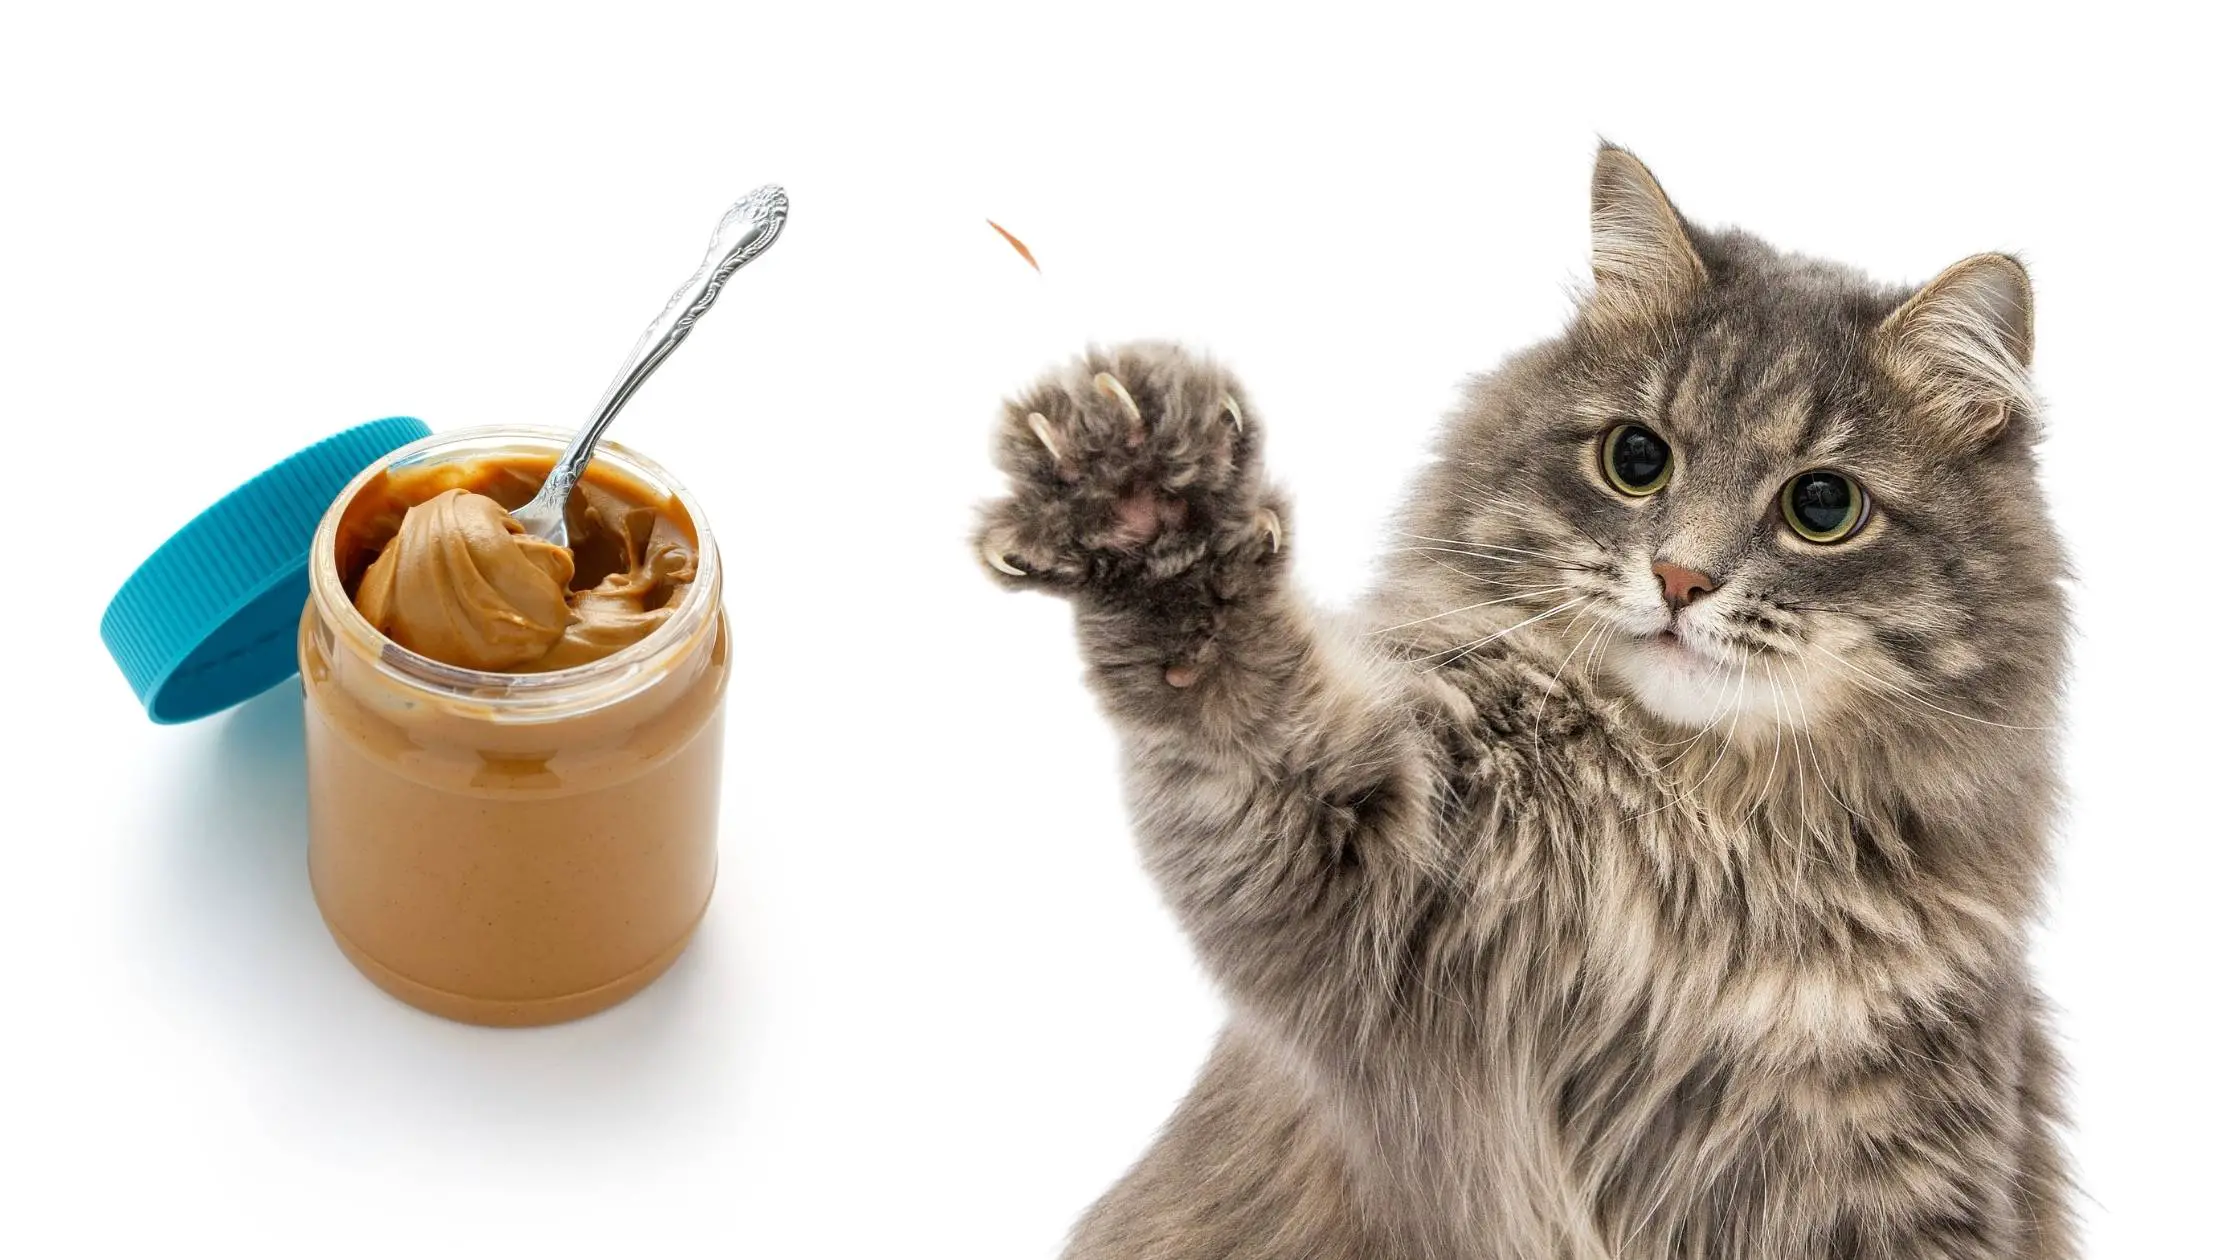 Can cats eat peanut butter